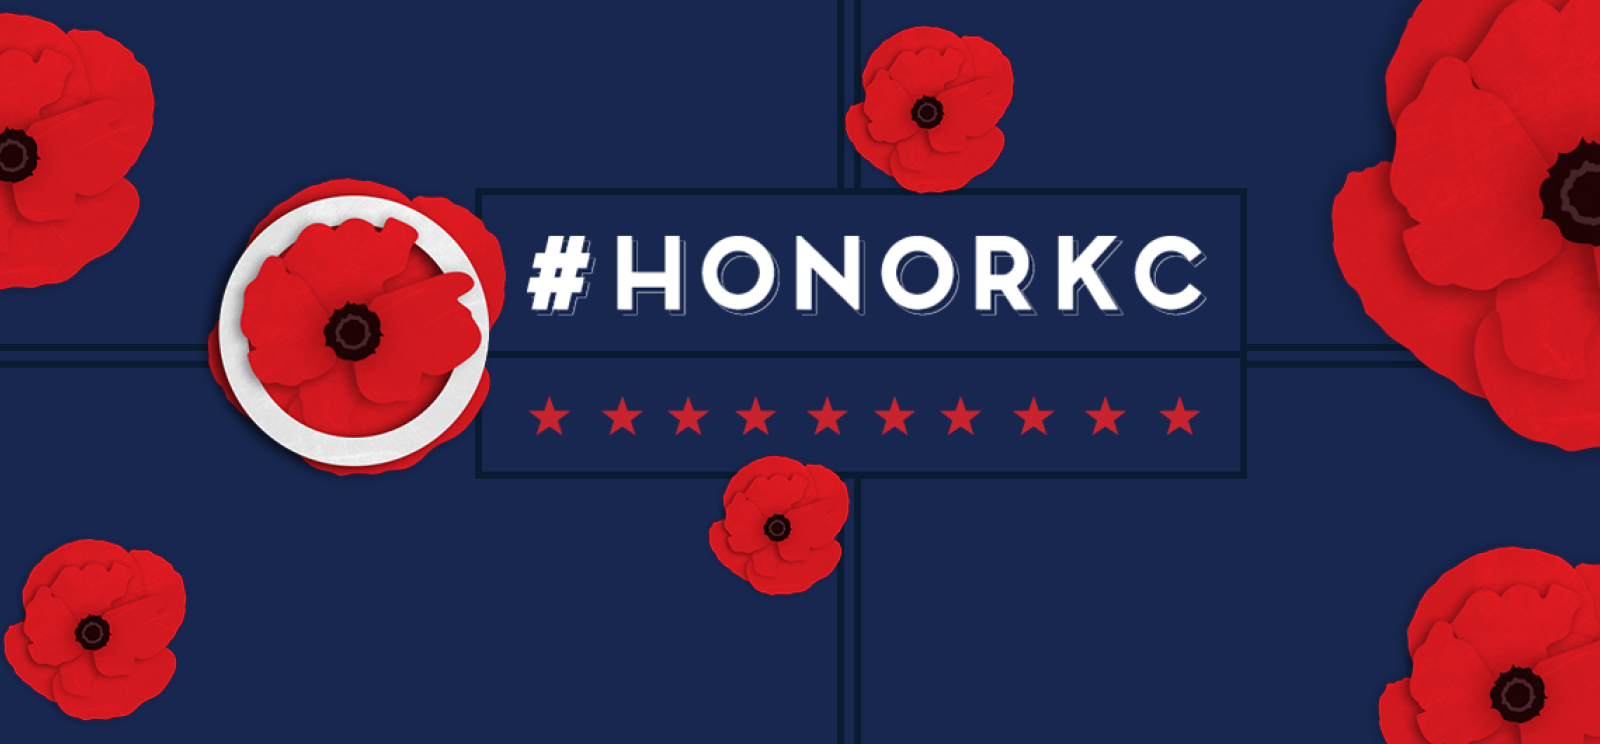 Navy blue background with red poppy flowers. Text: #HonorKC